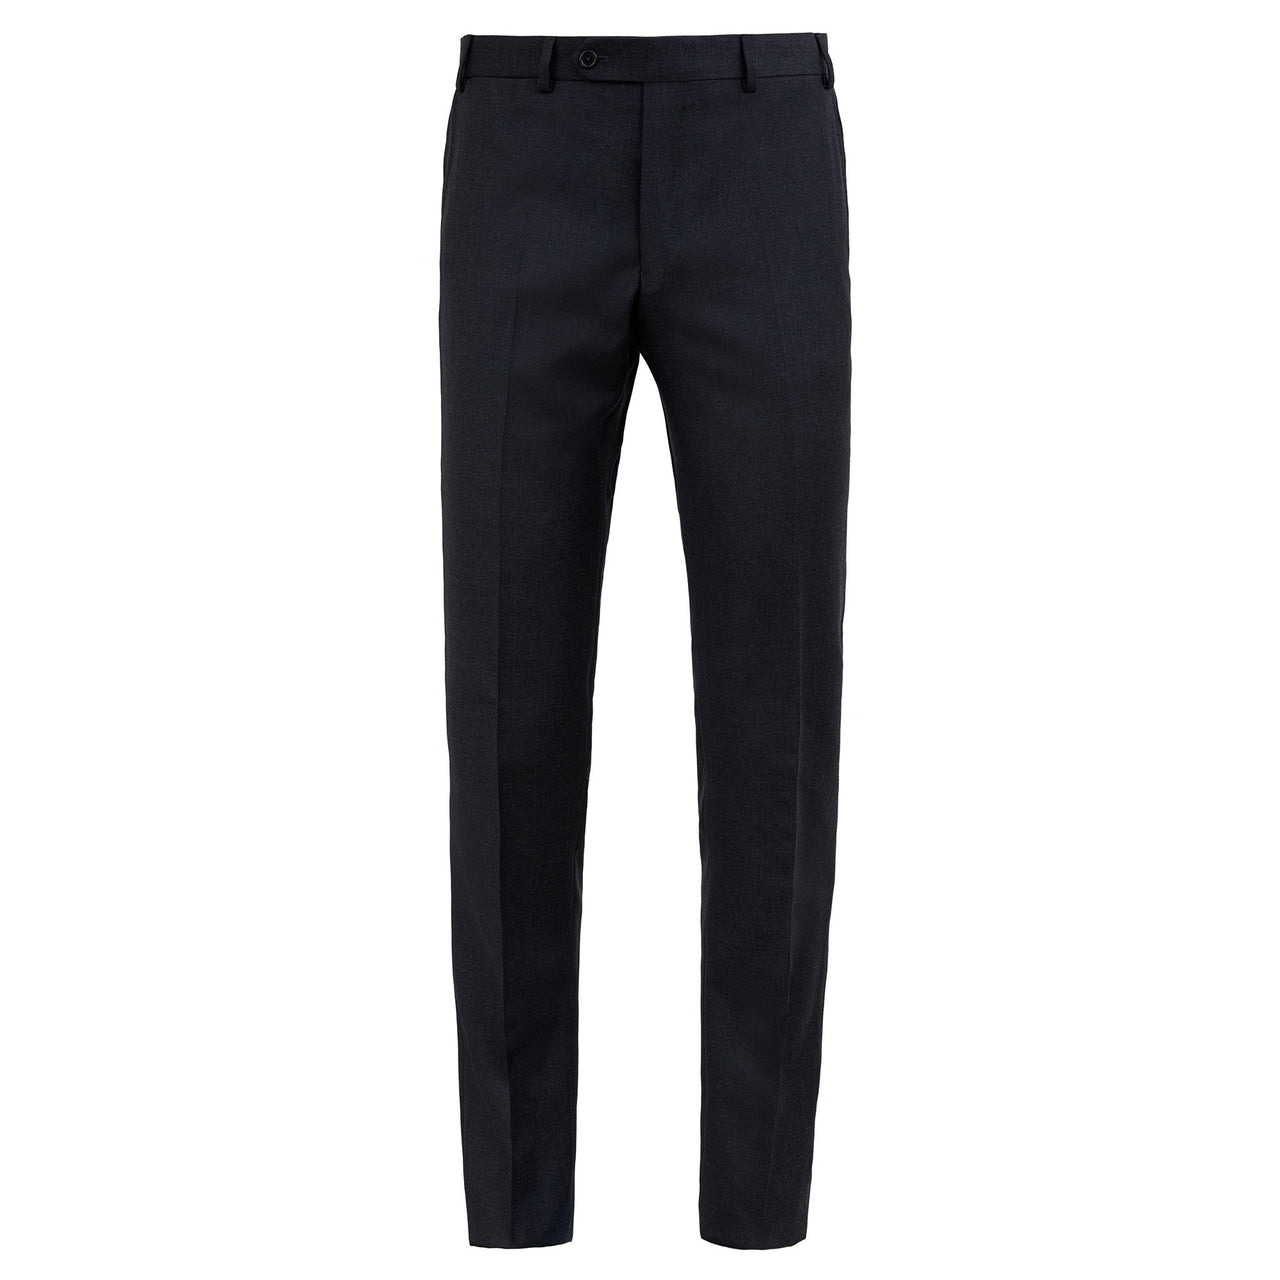 HENRY SARTORIAL Flat Front Trouser CHARCOAL REG